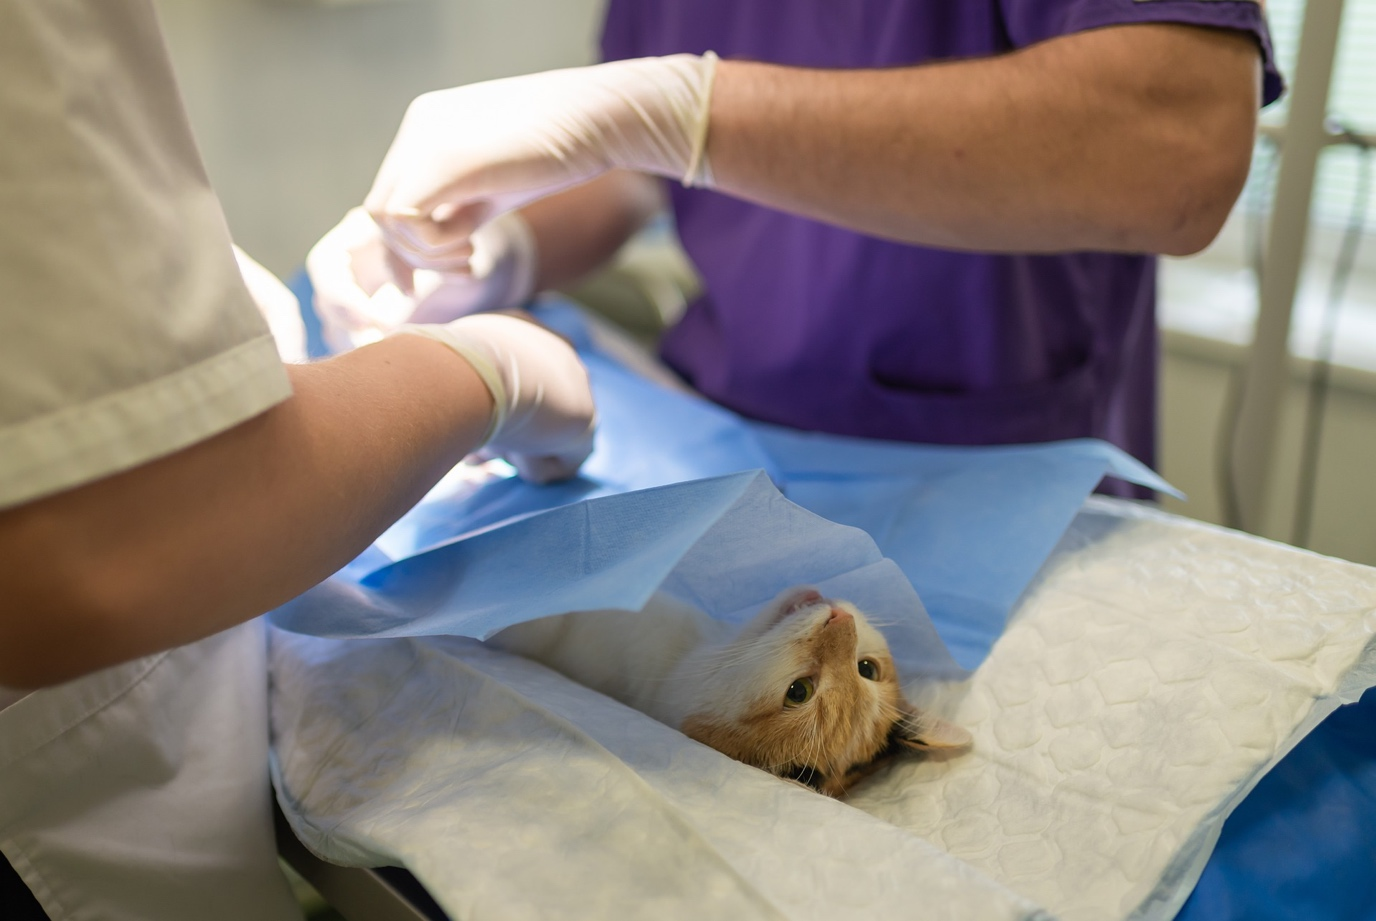 A cat undergoing surgery at a veterinary practice